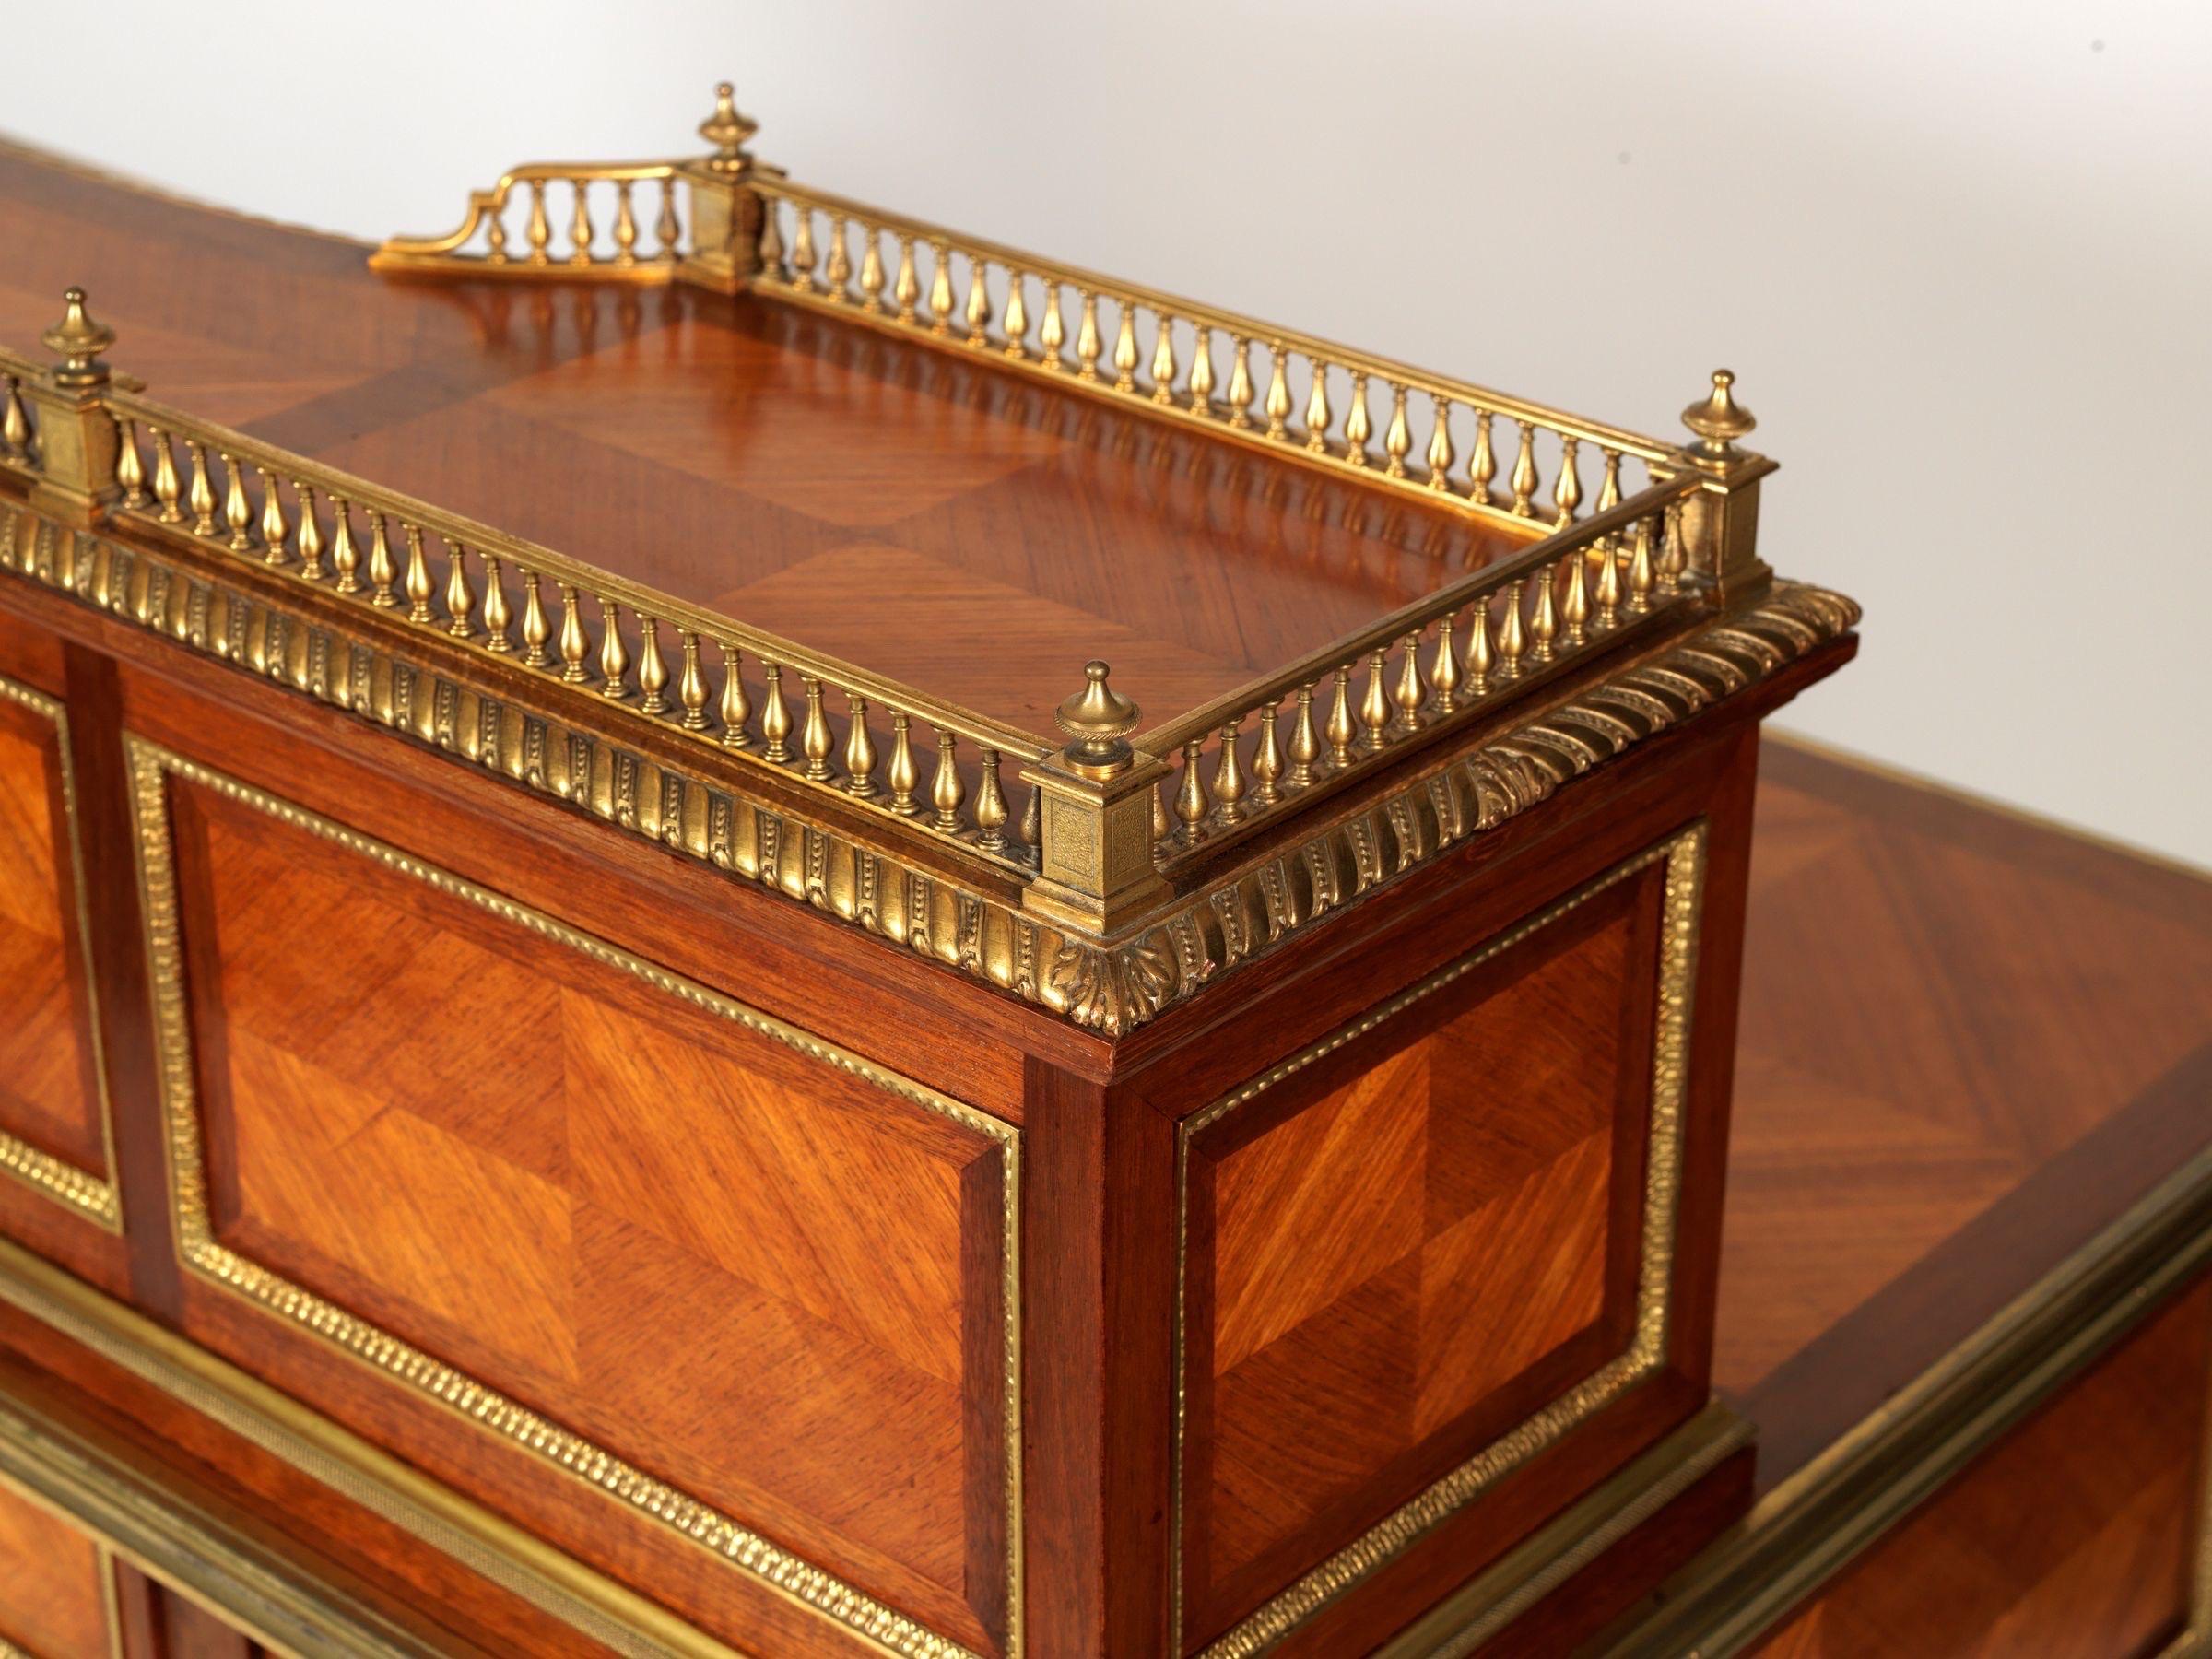 Antique French Ormolu Mounted Kingwood Desk by J Werner In Good Condition For Sale In Antrim, GB